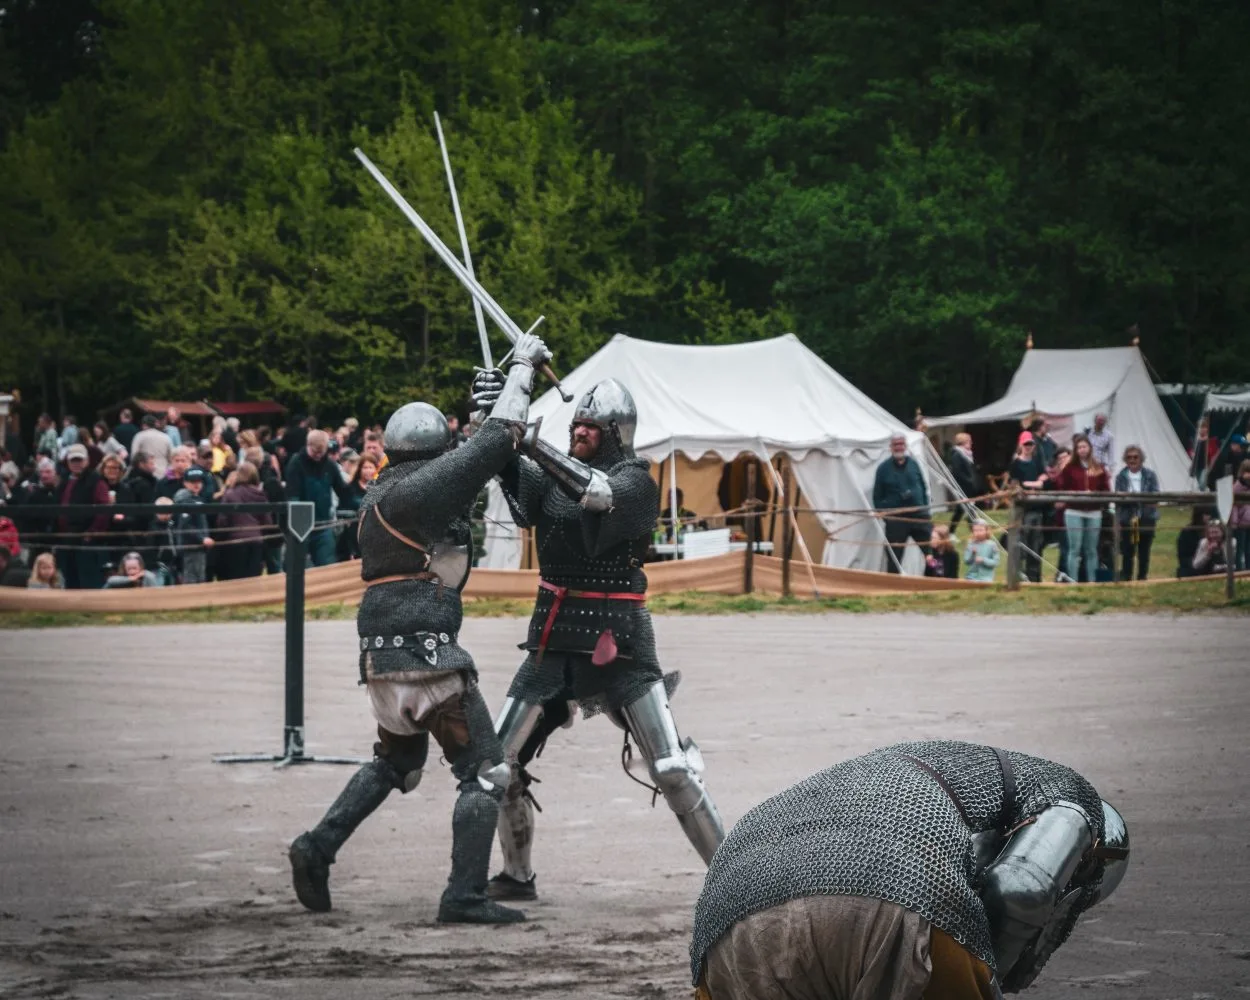 Two knights fighting